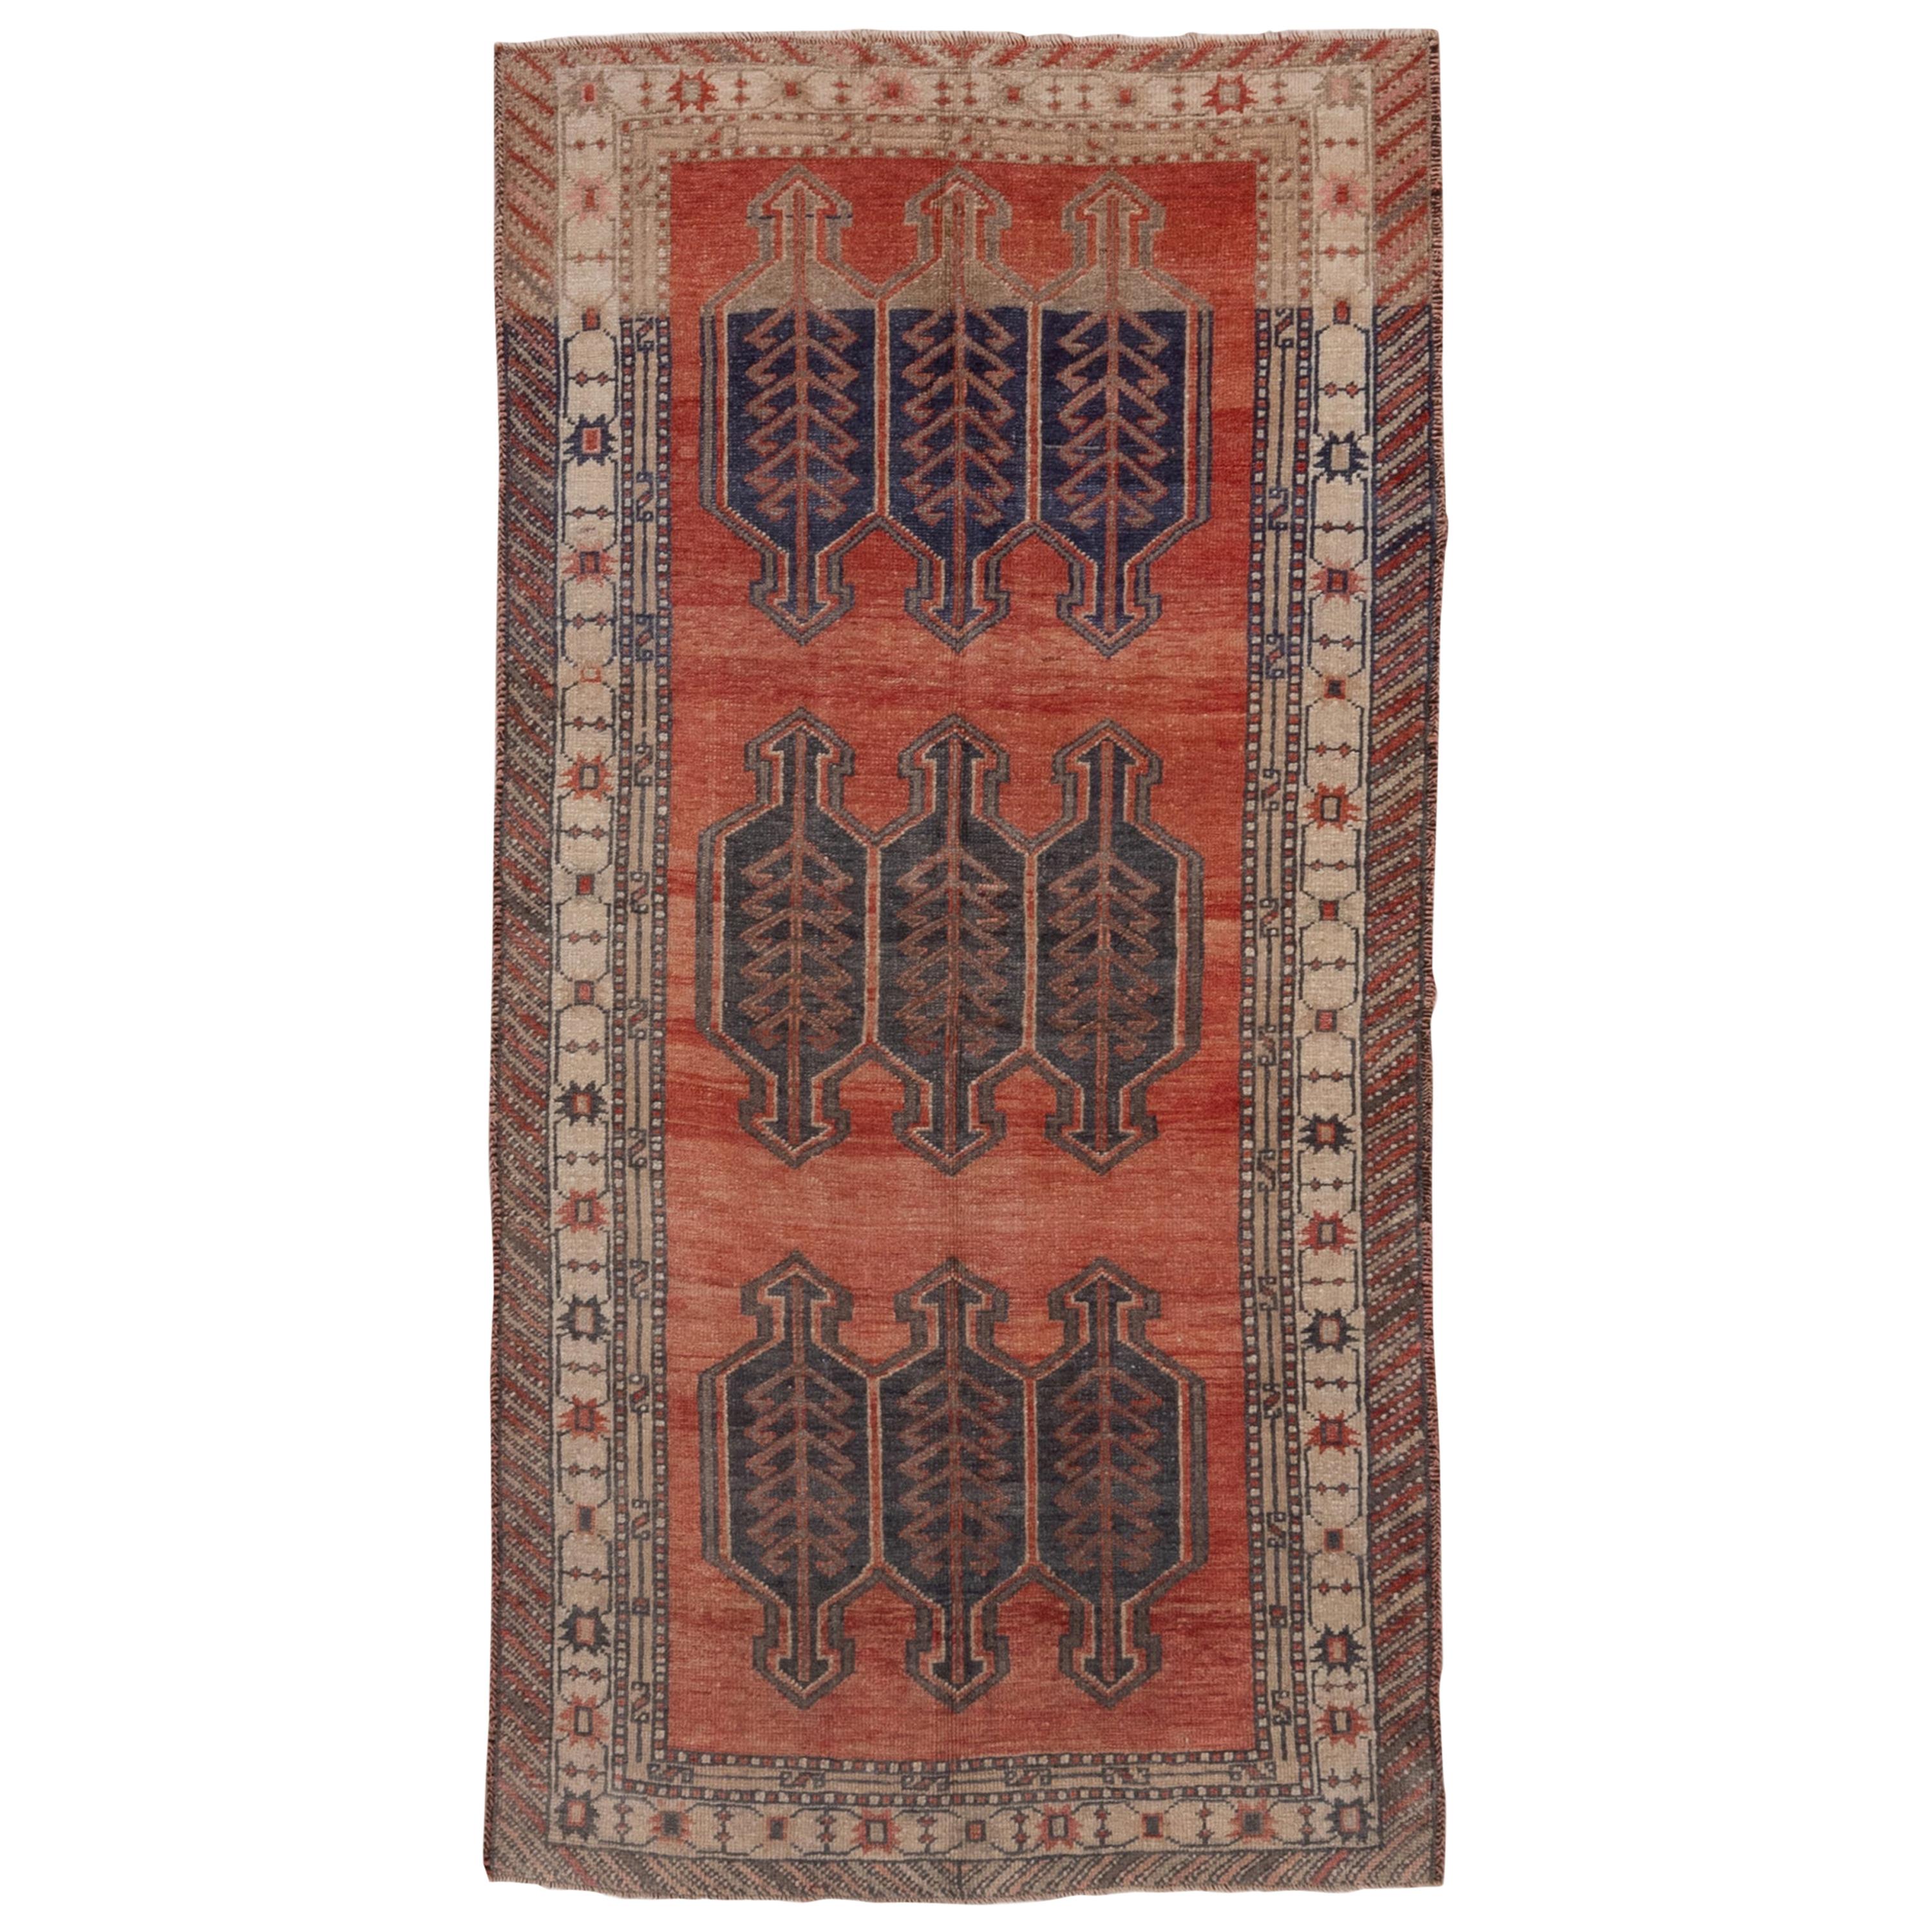 One of a Kind Handwoven Oushak Rug